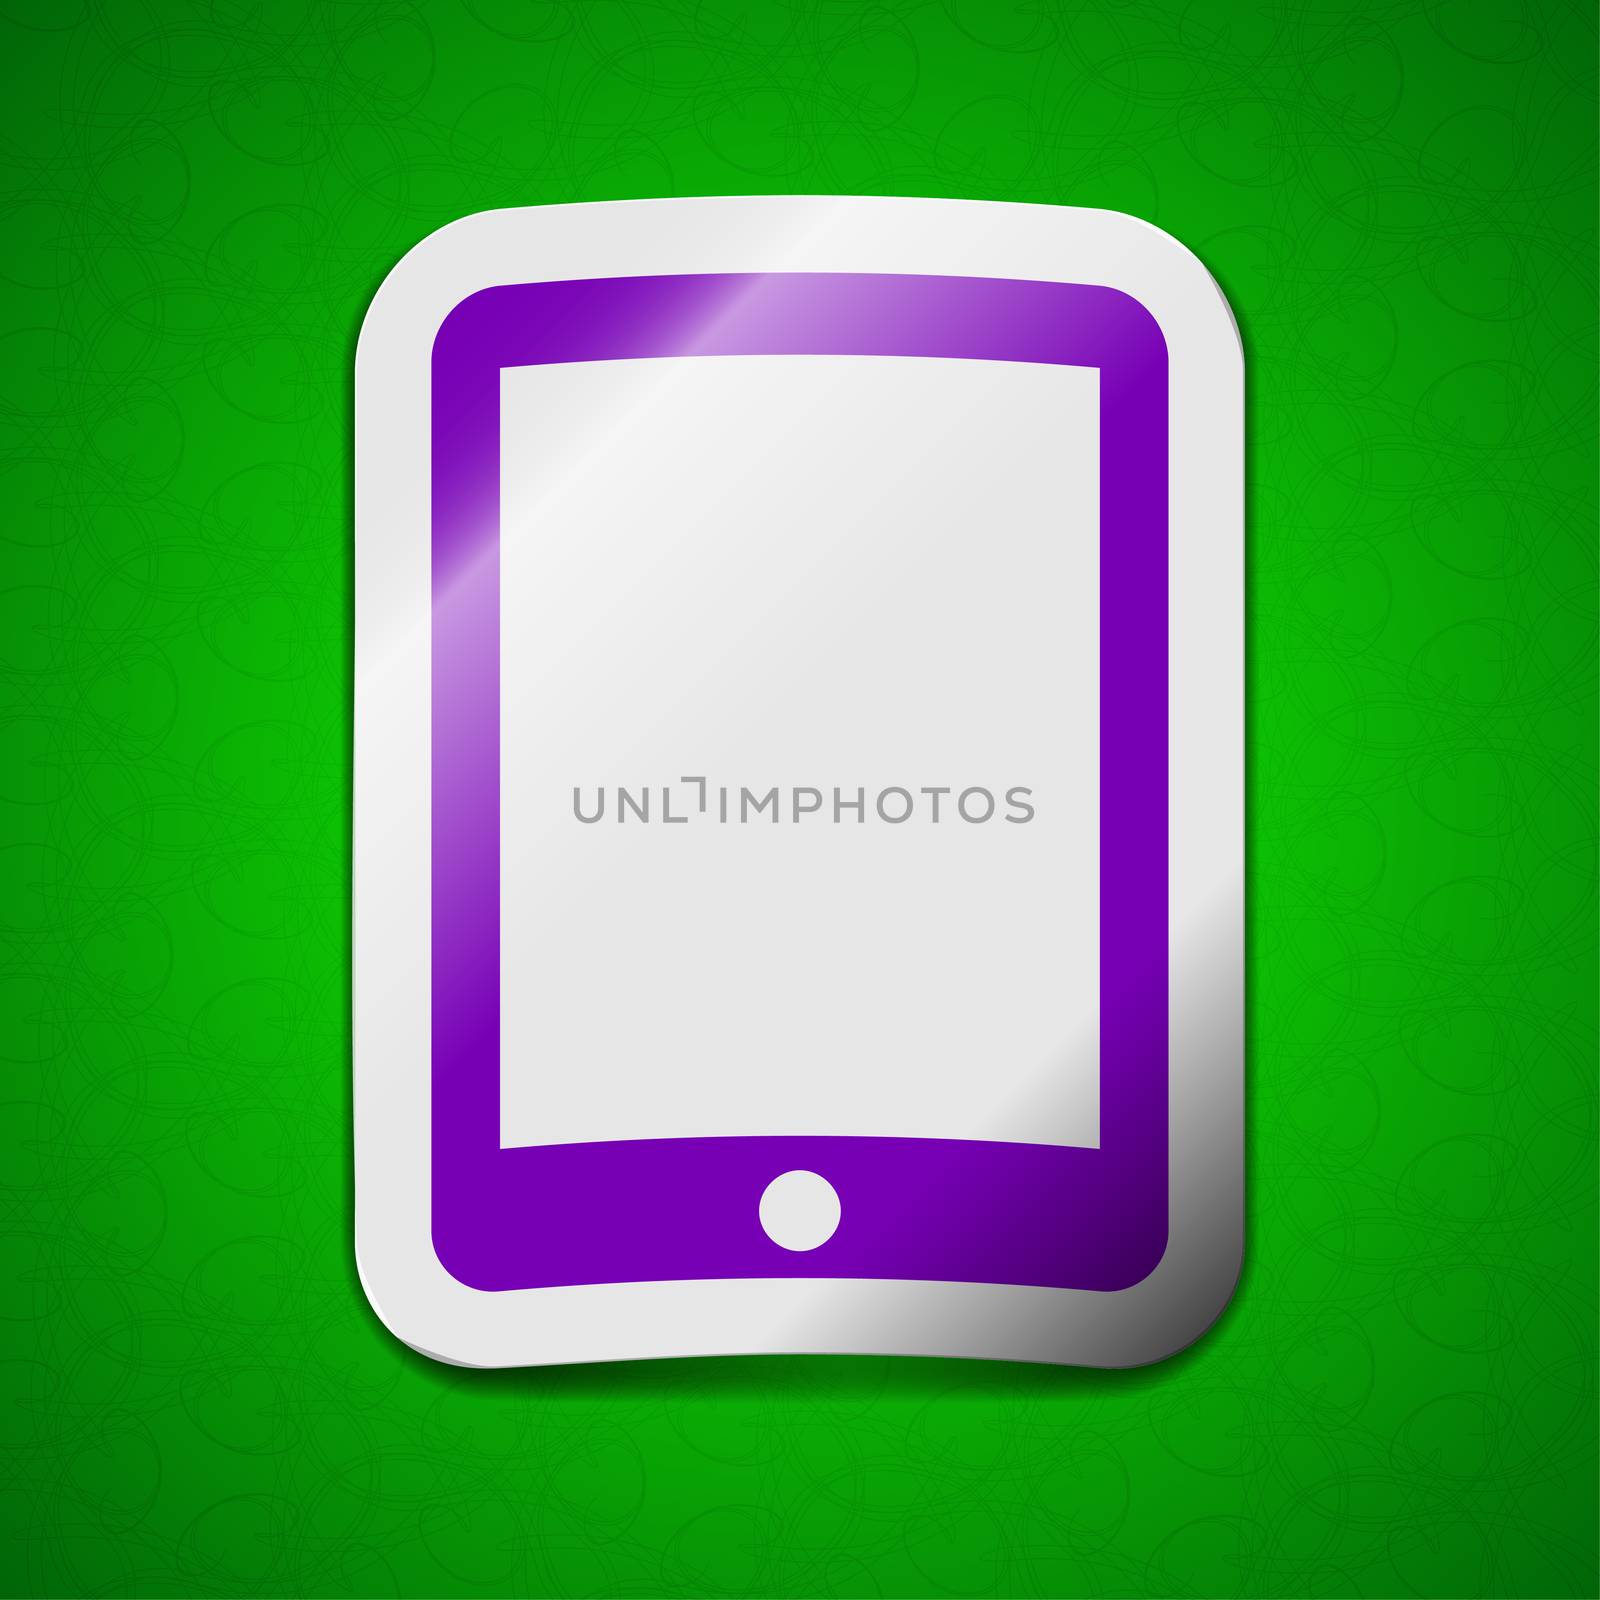 Tablet icon sign. Symbol chic colored sticky label on green background.  illustration